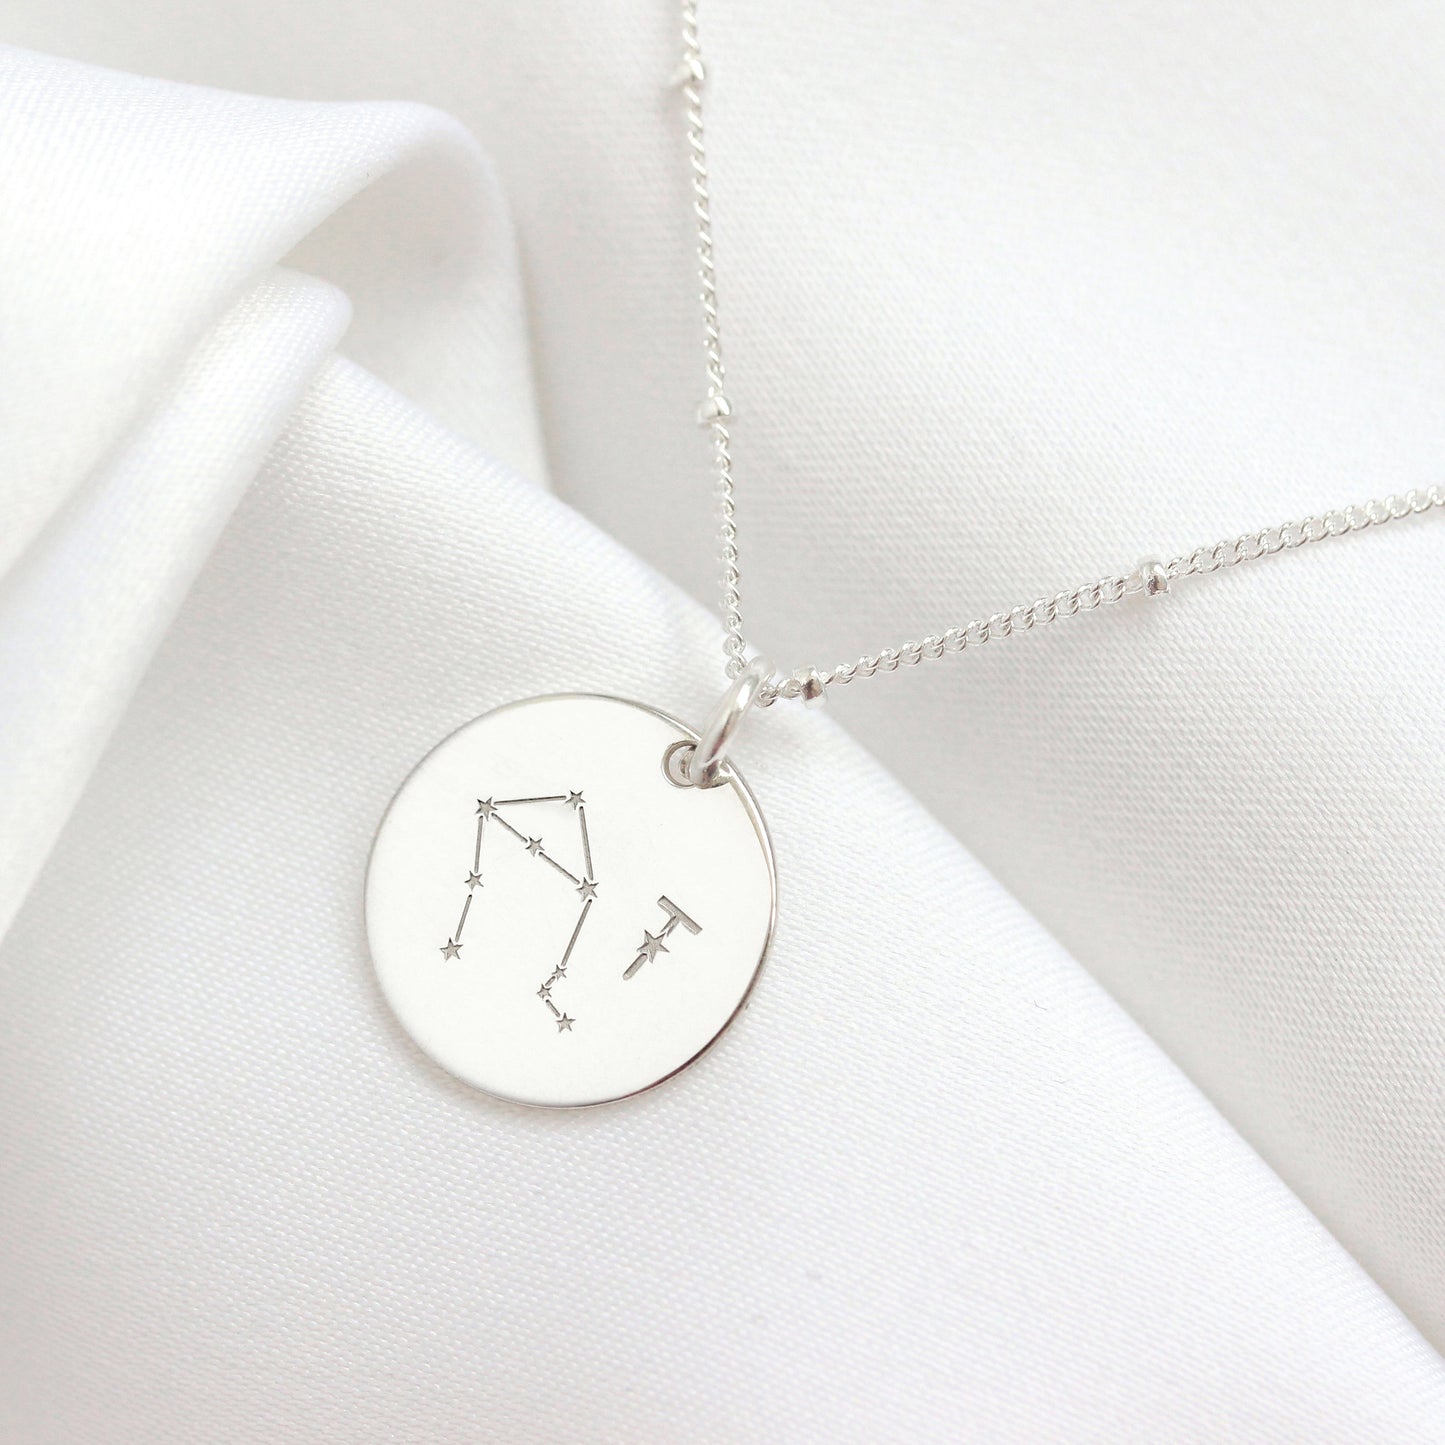 Bespoke Sterling Silver Libra Constellation & Initial Necklace 12-24 Inch